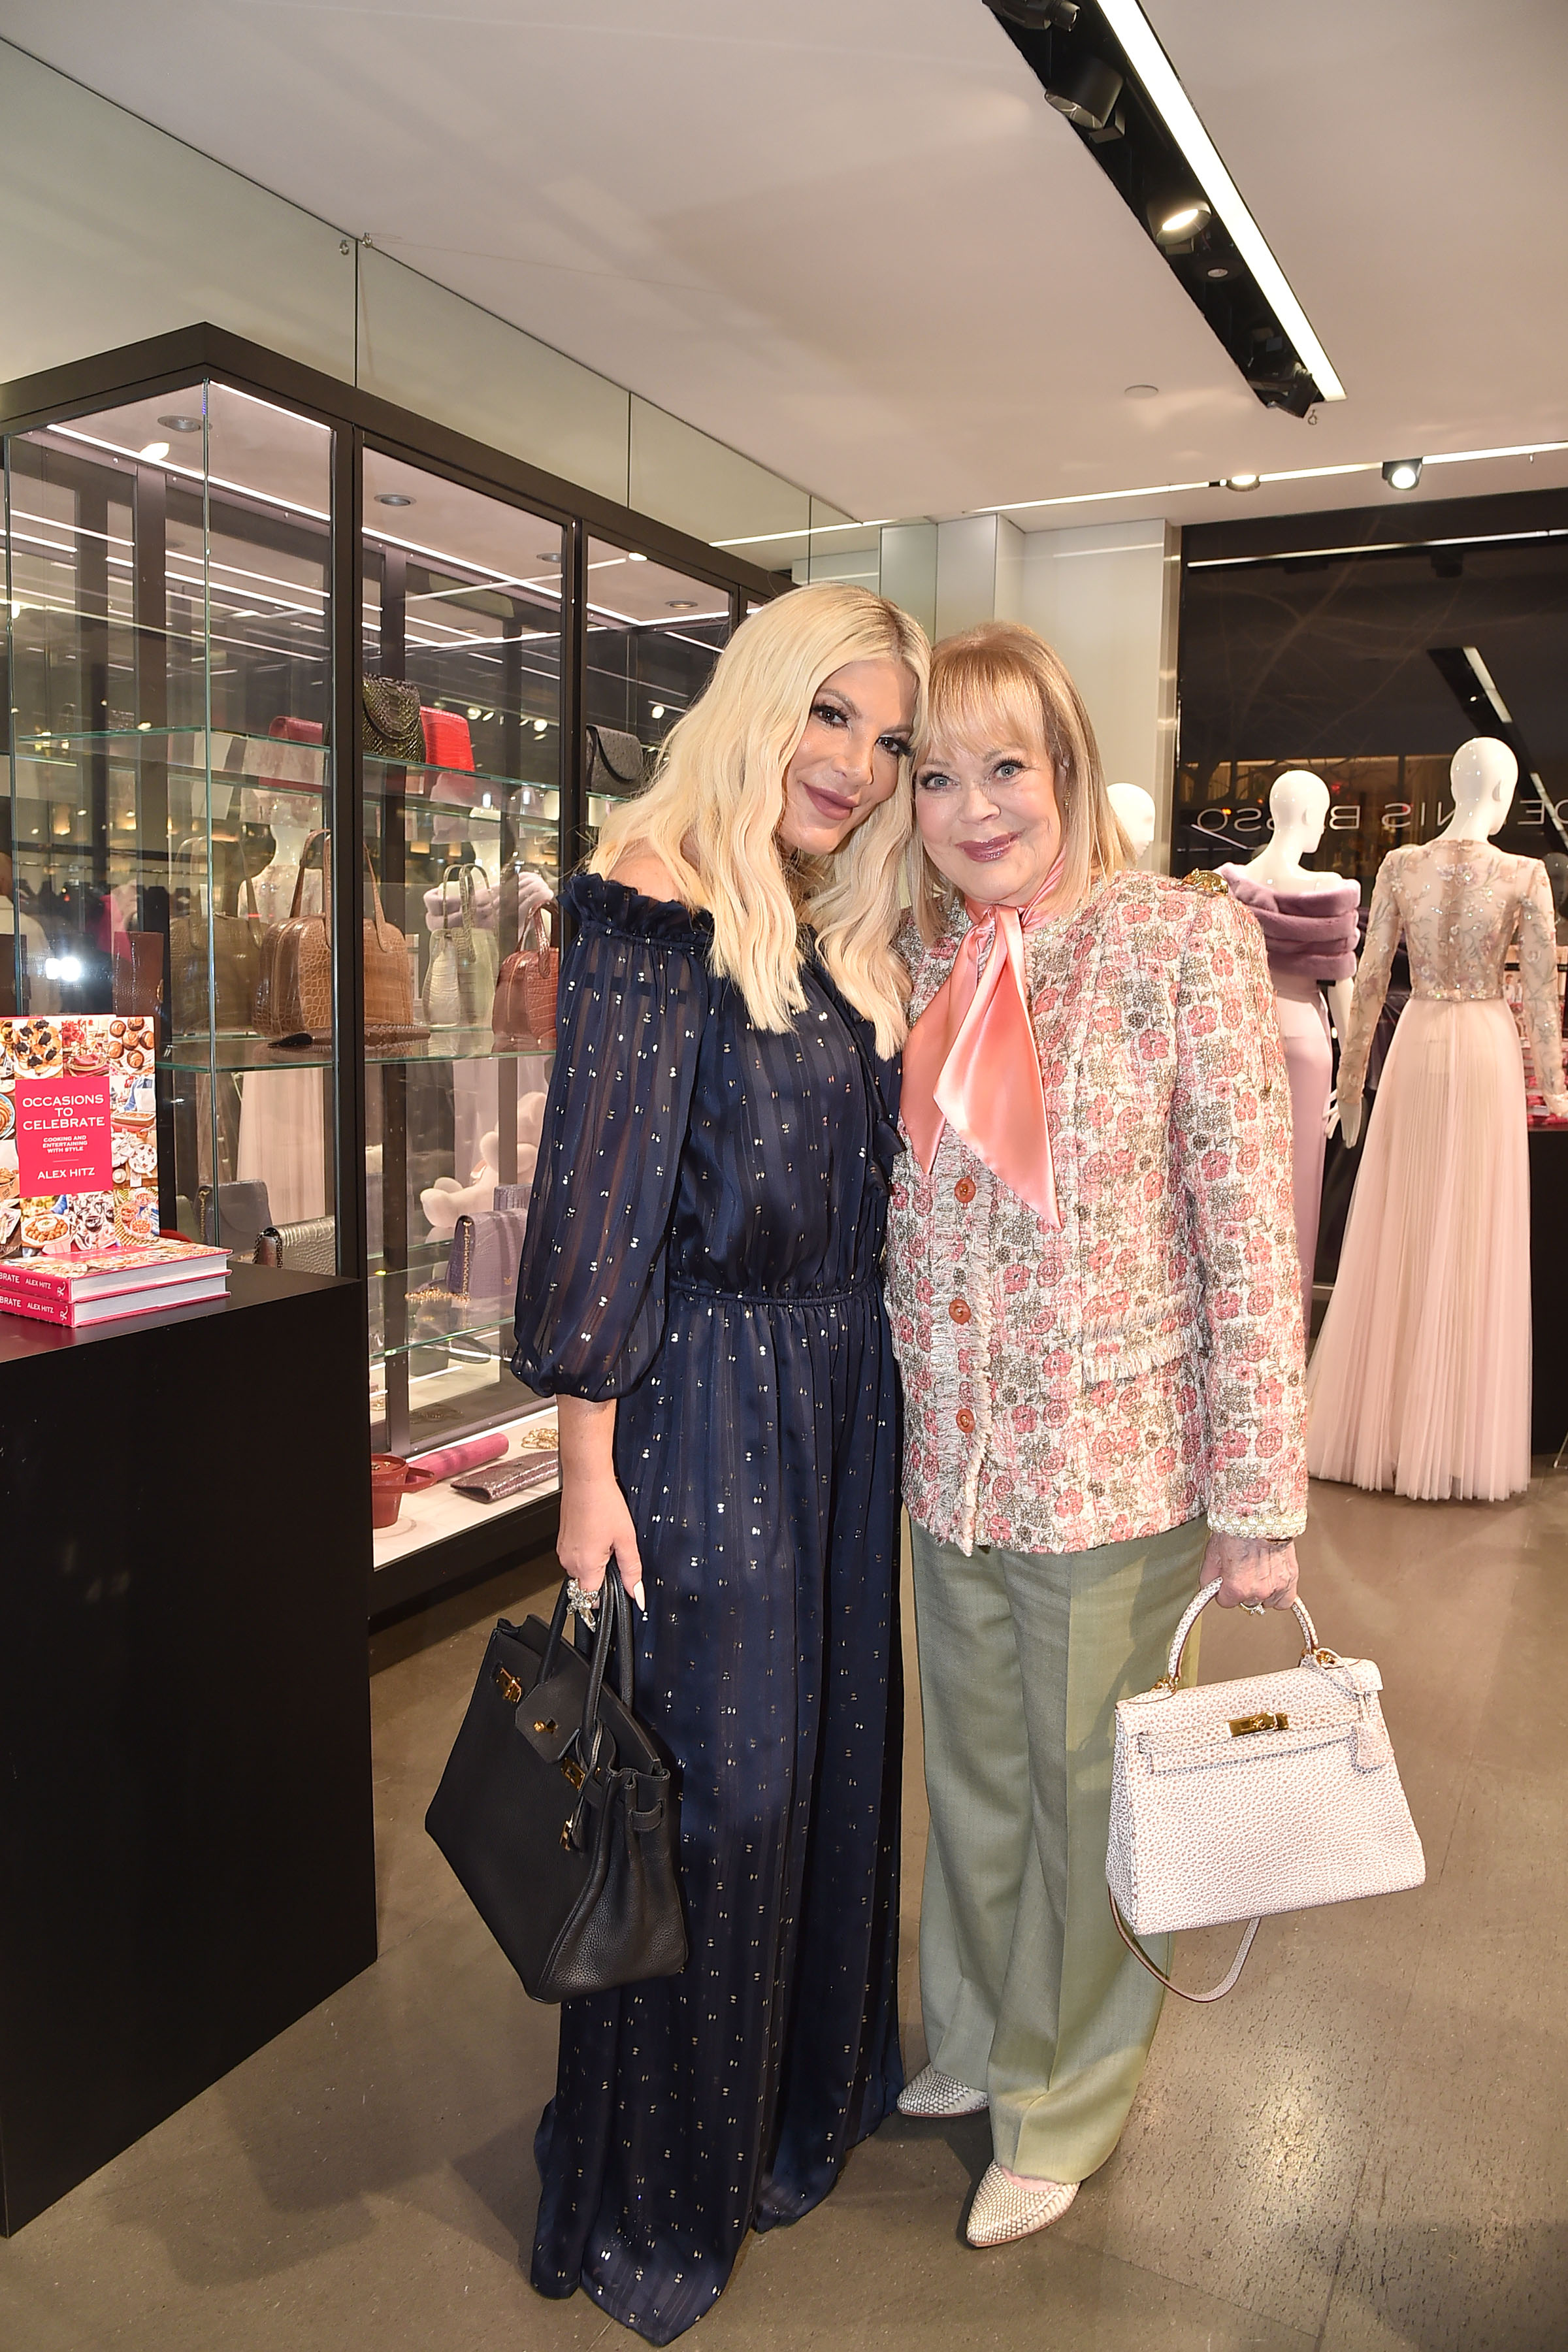 Tori and Candy Spelling at Alex Hitz's "Occasions To Celebrate" Book Party on October 6, 2022 at Dennis Basso in New York, New York | Source: Getty Images